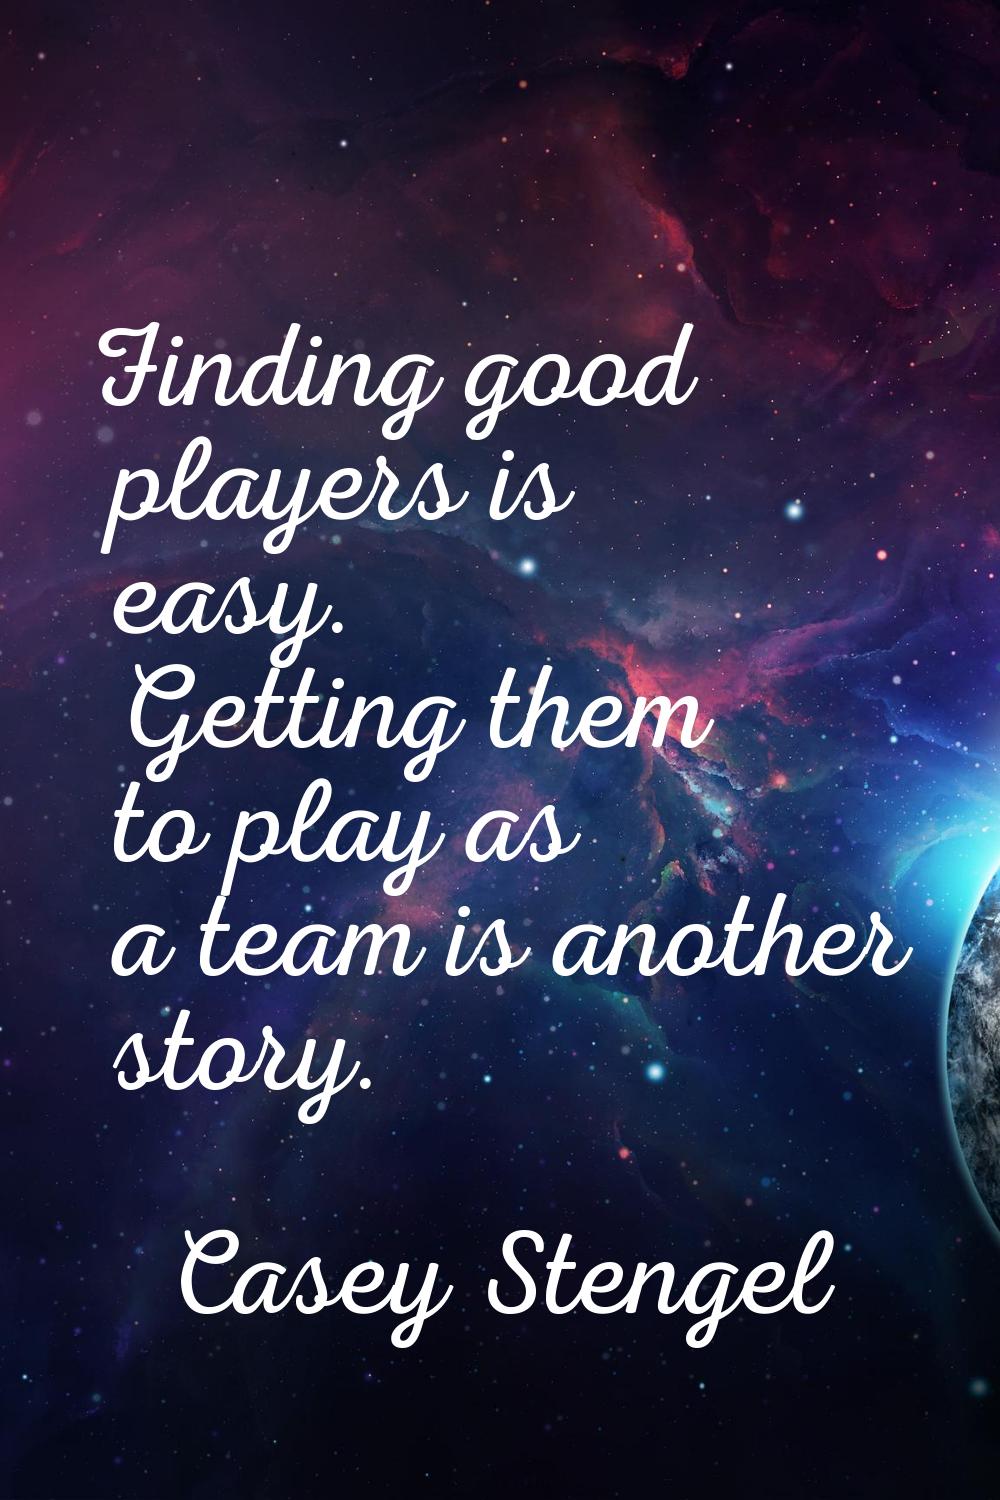 Finding good players is easy. Getting them to play as a team is another story.